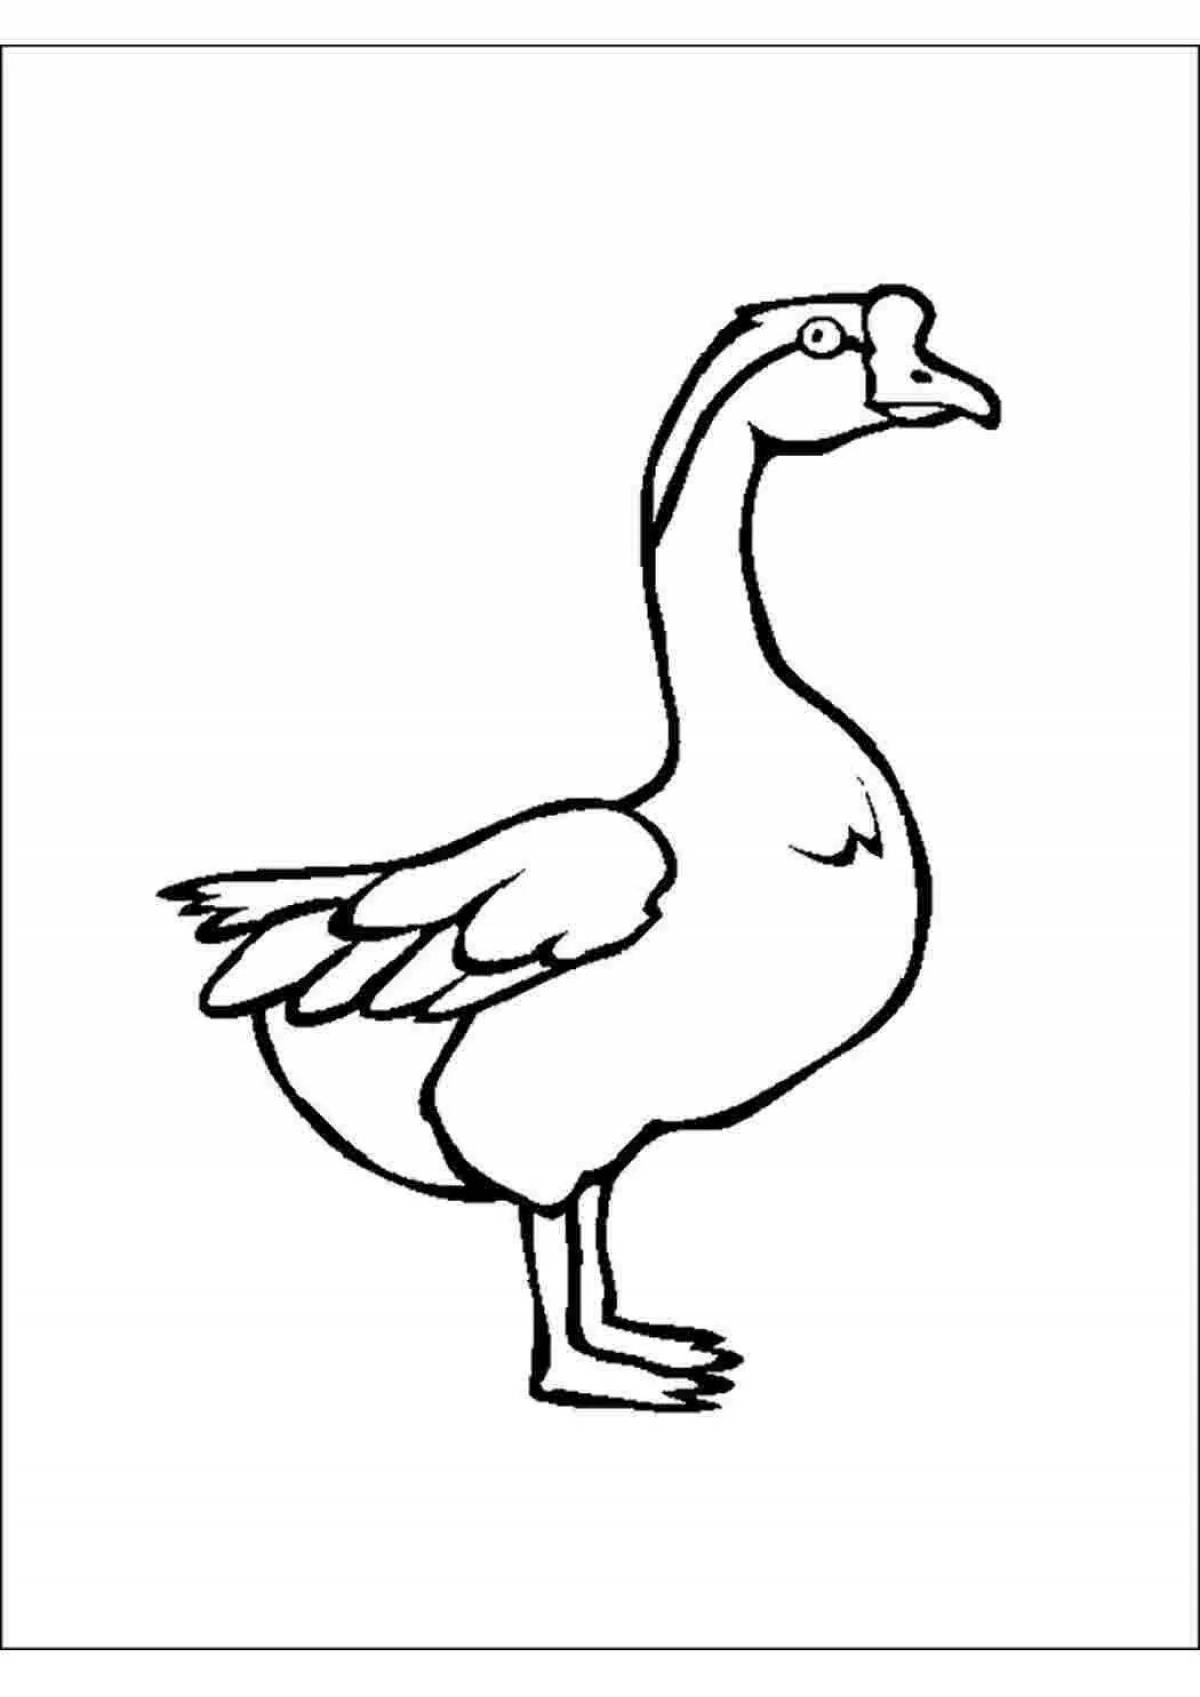 Outstanding goose coloring page for 3-4 year olds